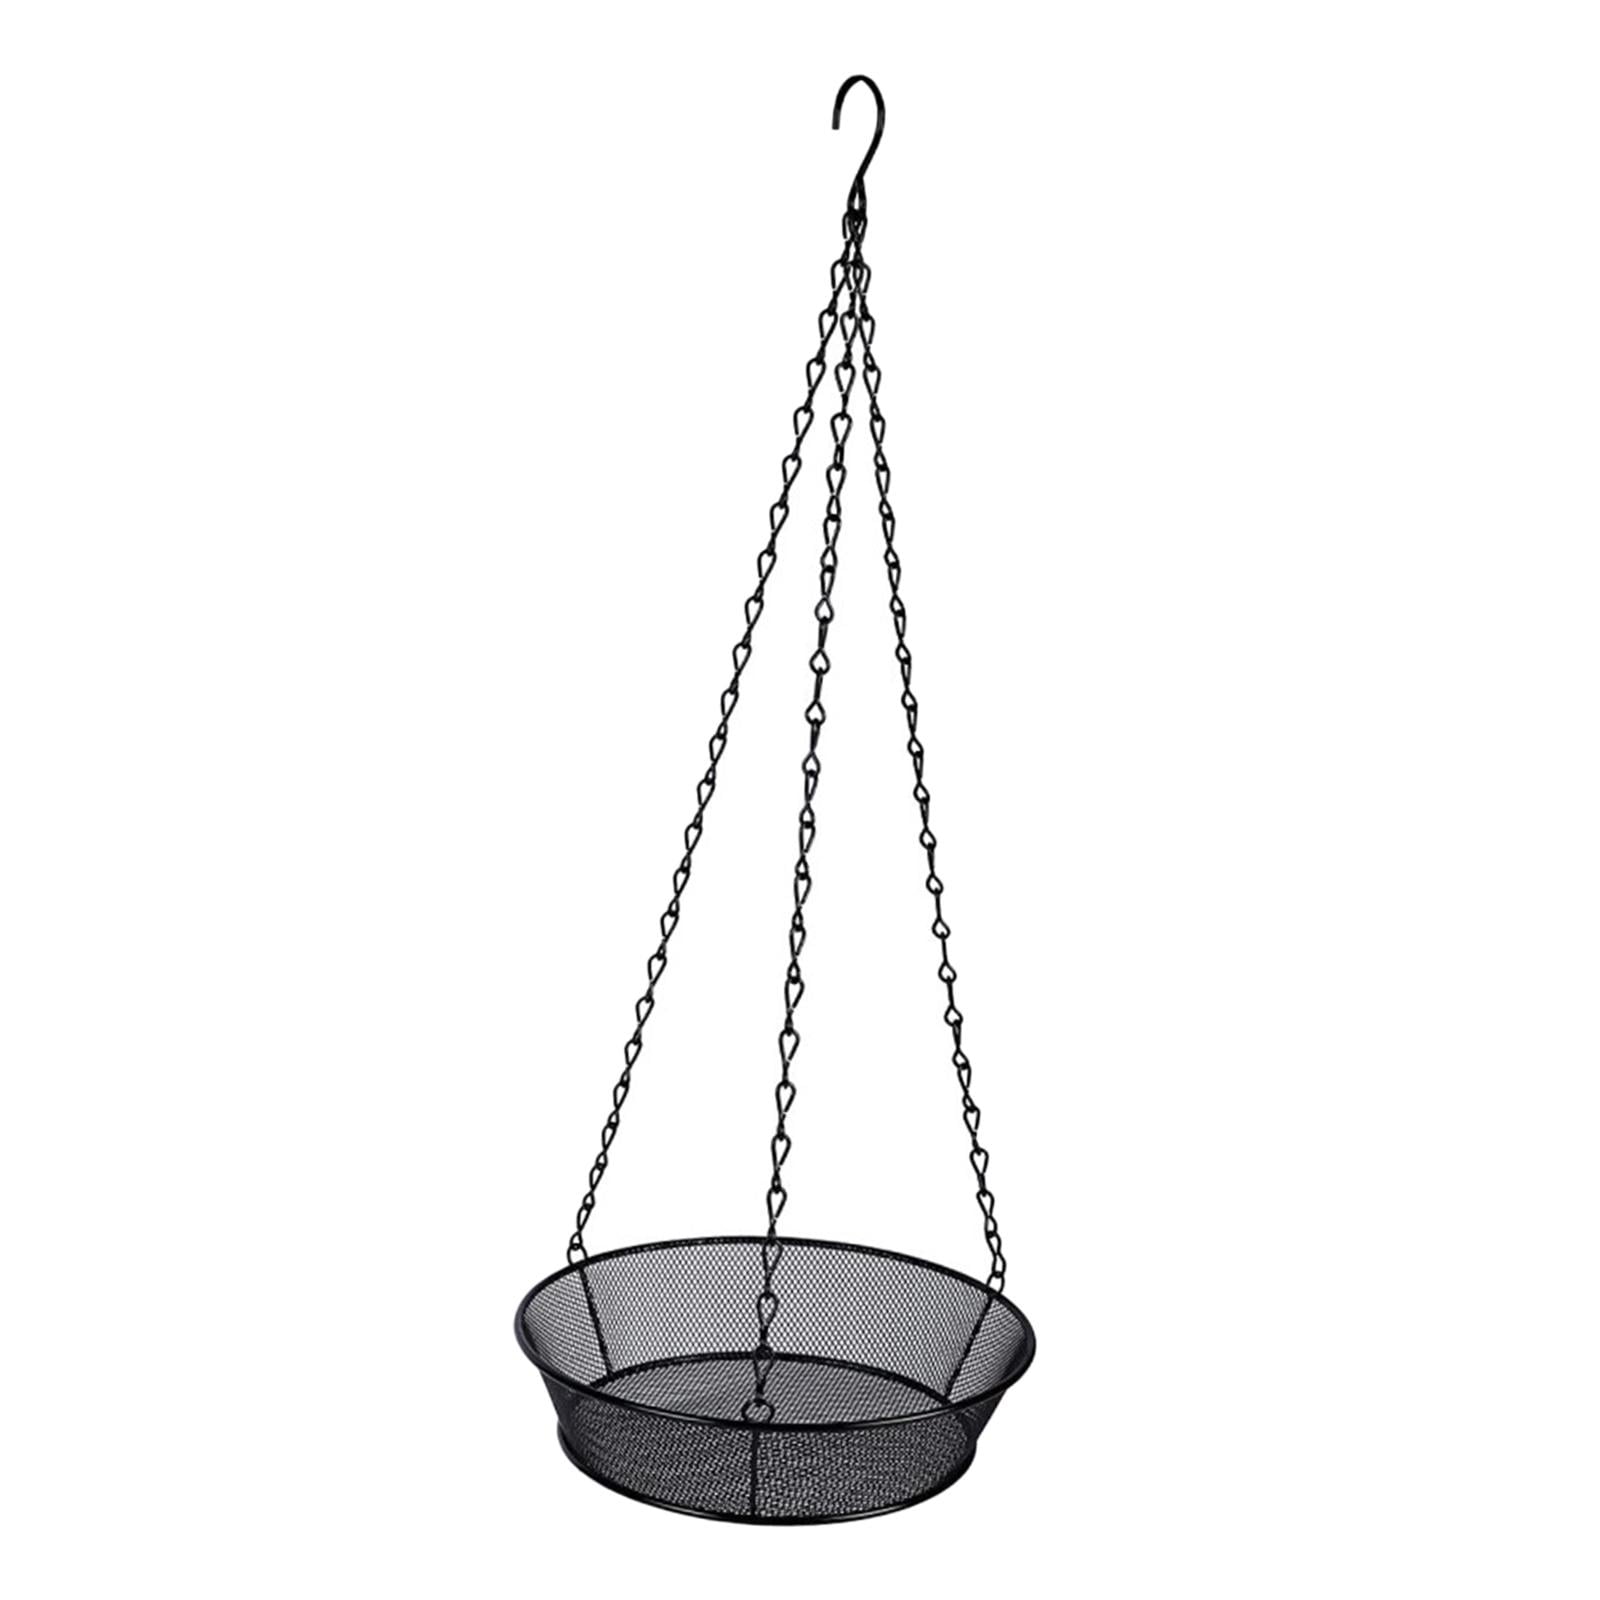 Large Hanging Bird Feeder 3 Strong Chains Round for Porch Outdoors Ornaments, Size: 18.3x42cm, Black